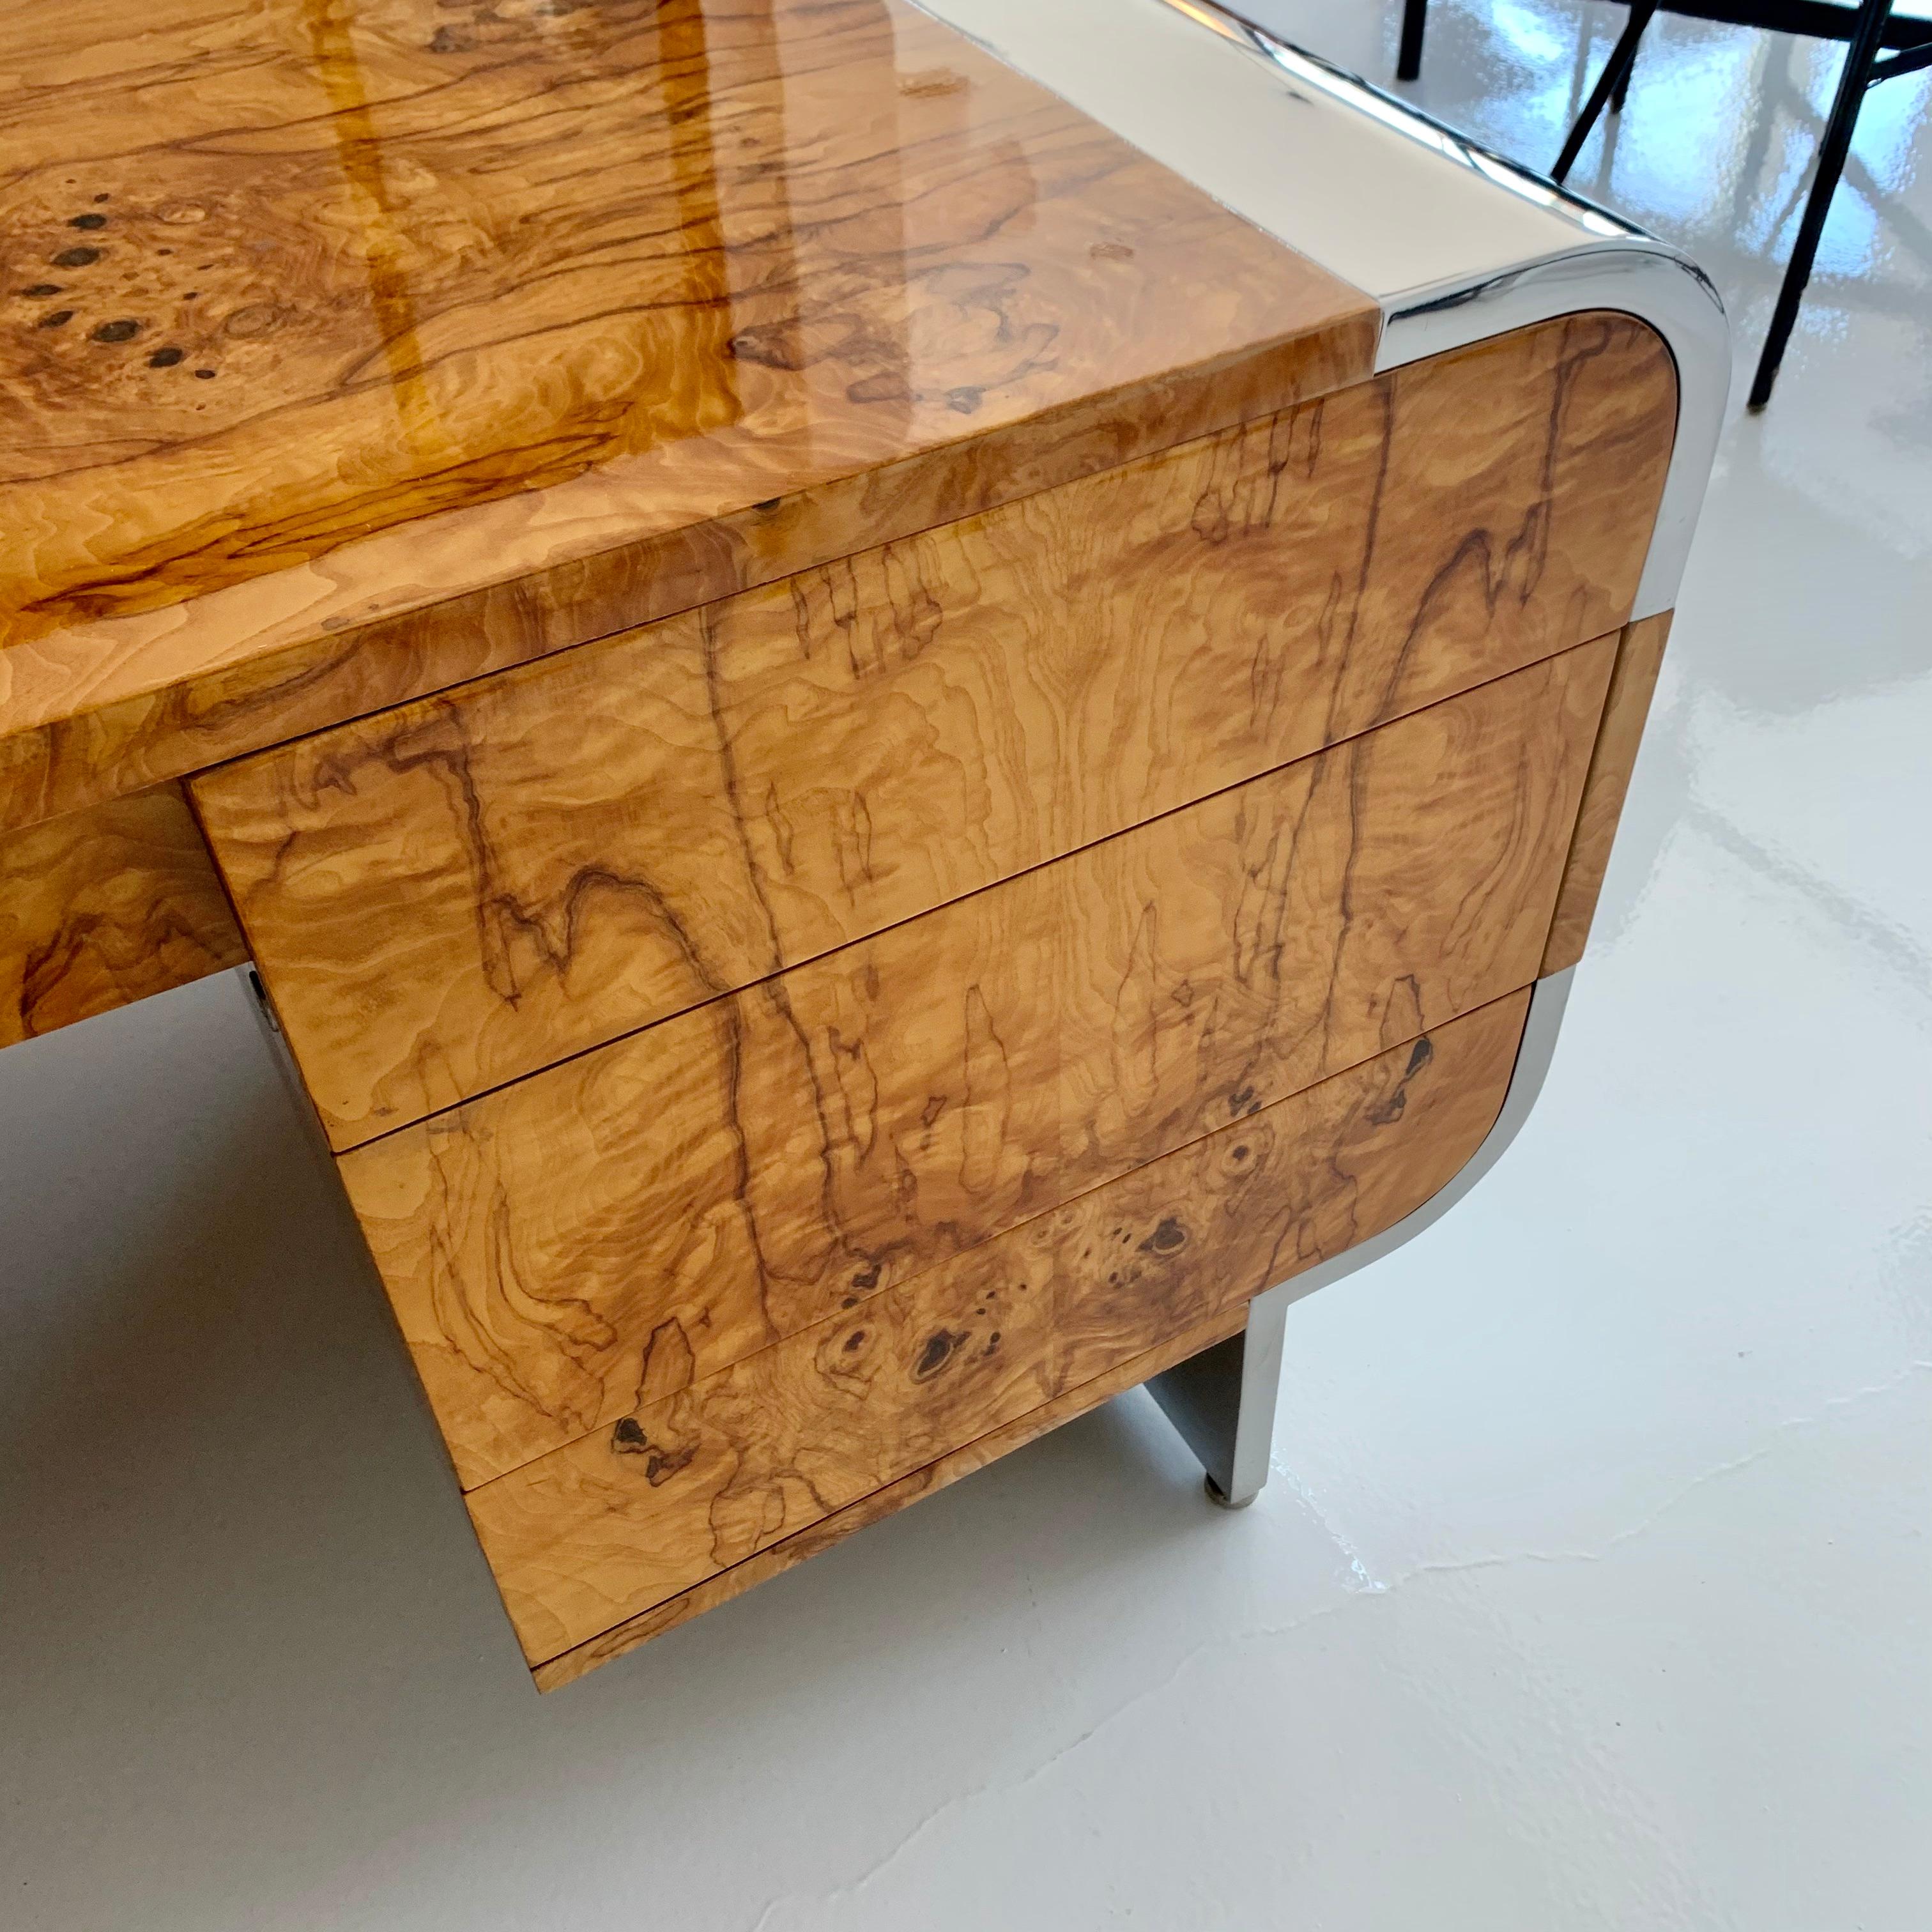 Stainless Steel Burl Wood Pace Desk by Irving Rosen